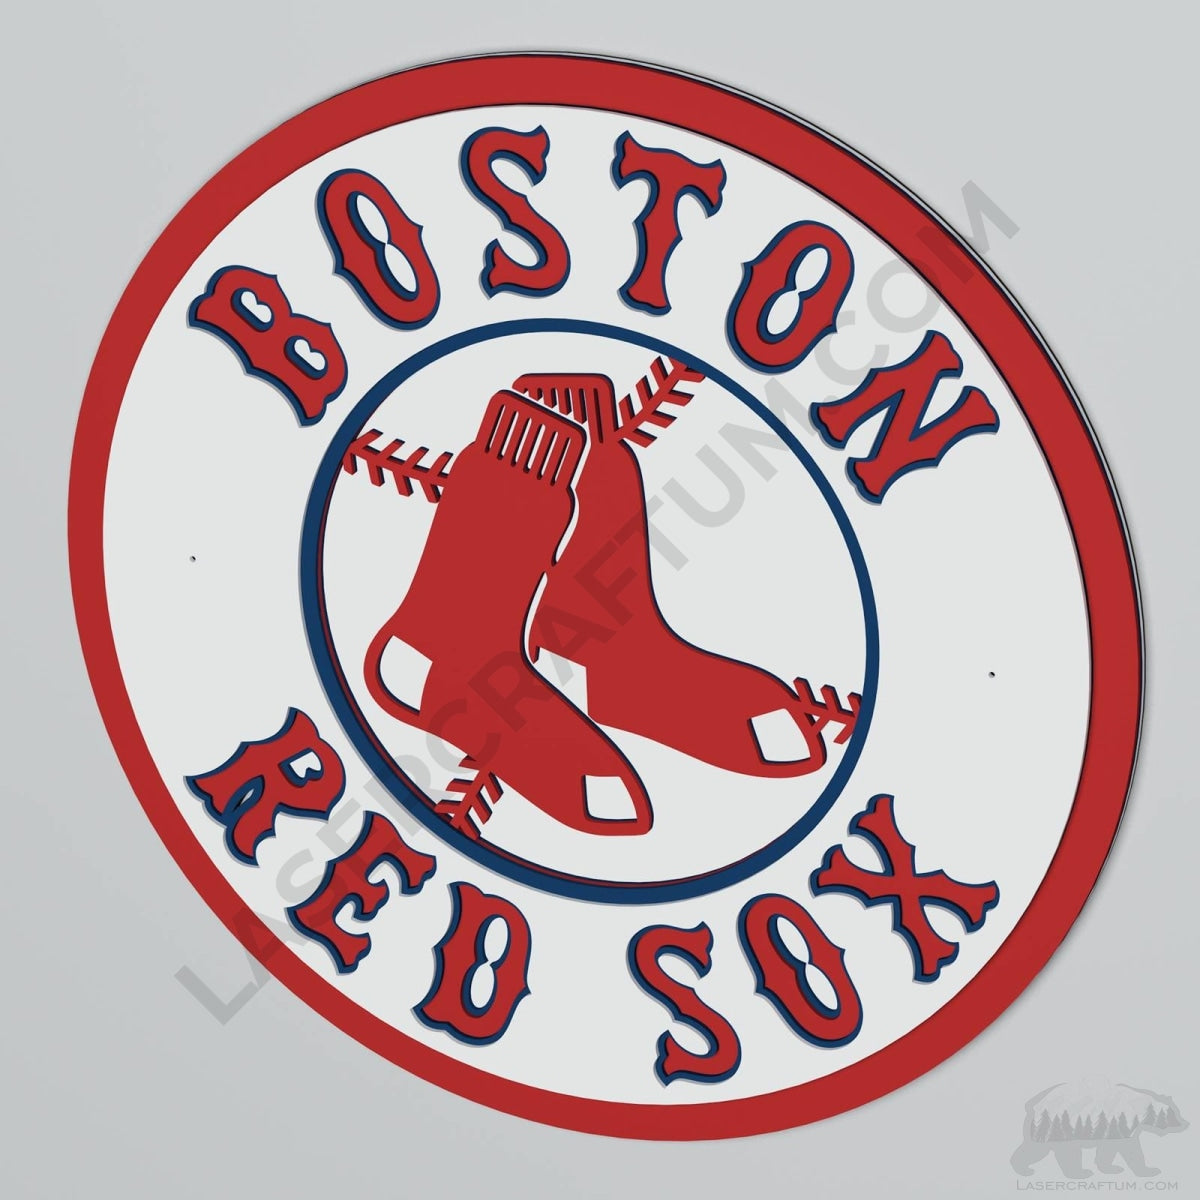 Red Sox Drop Trademark Applications for Boston